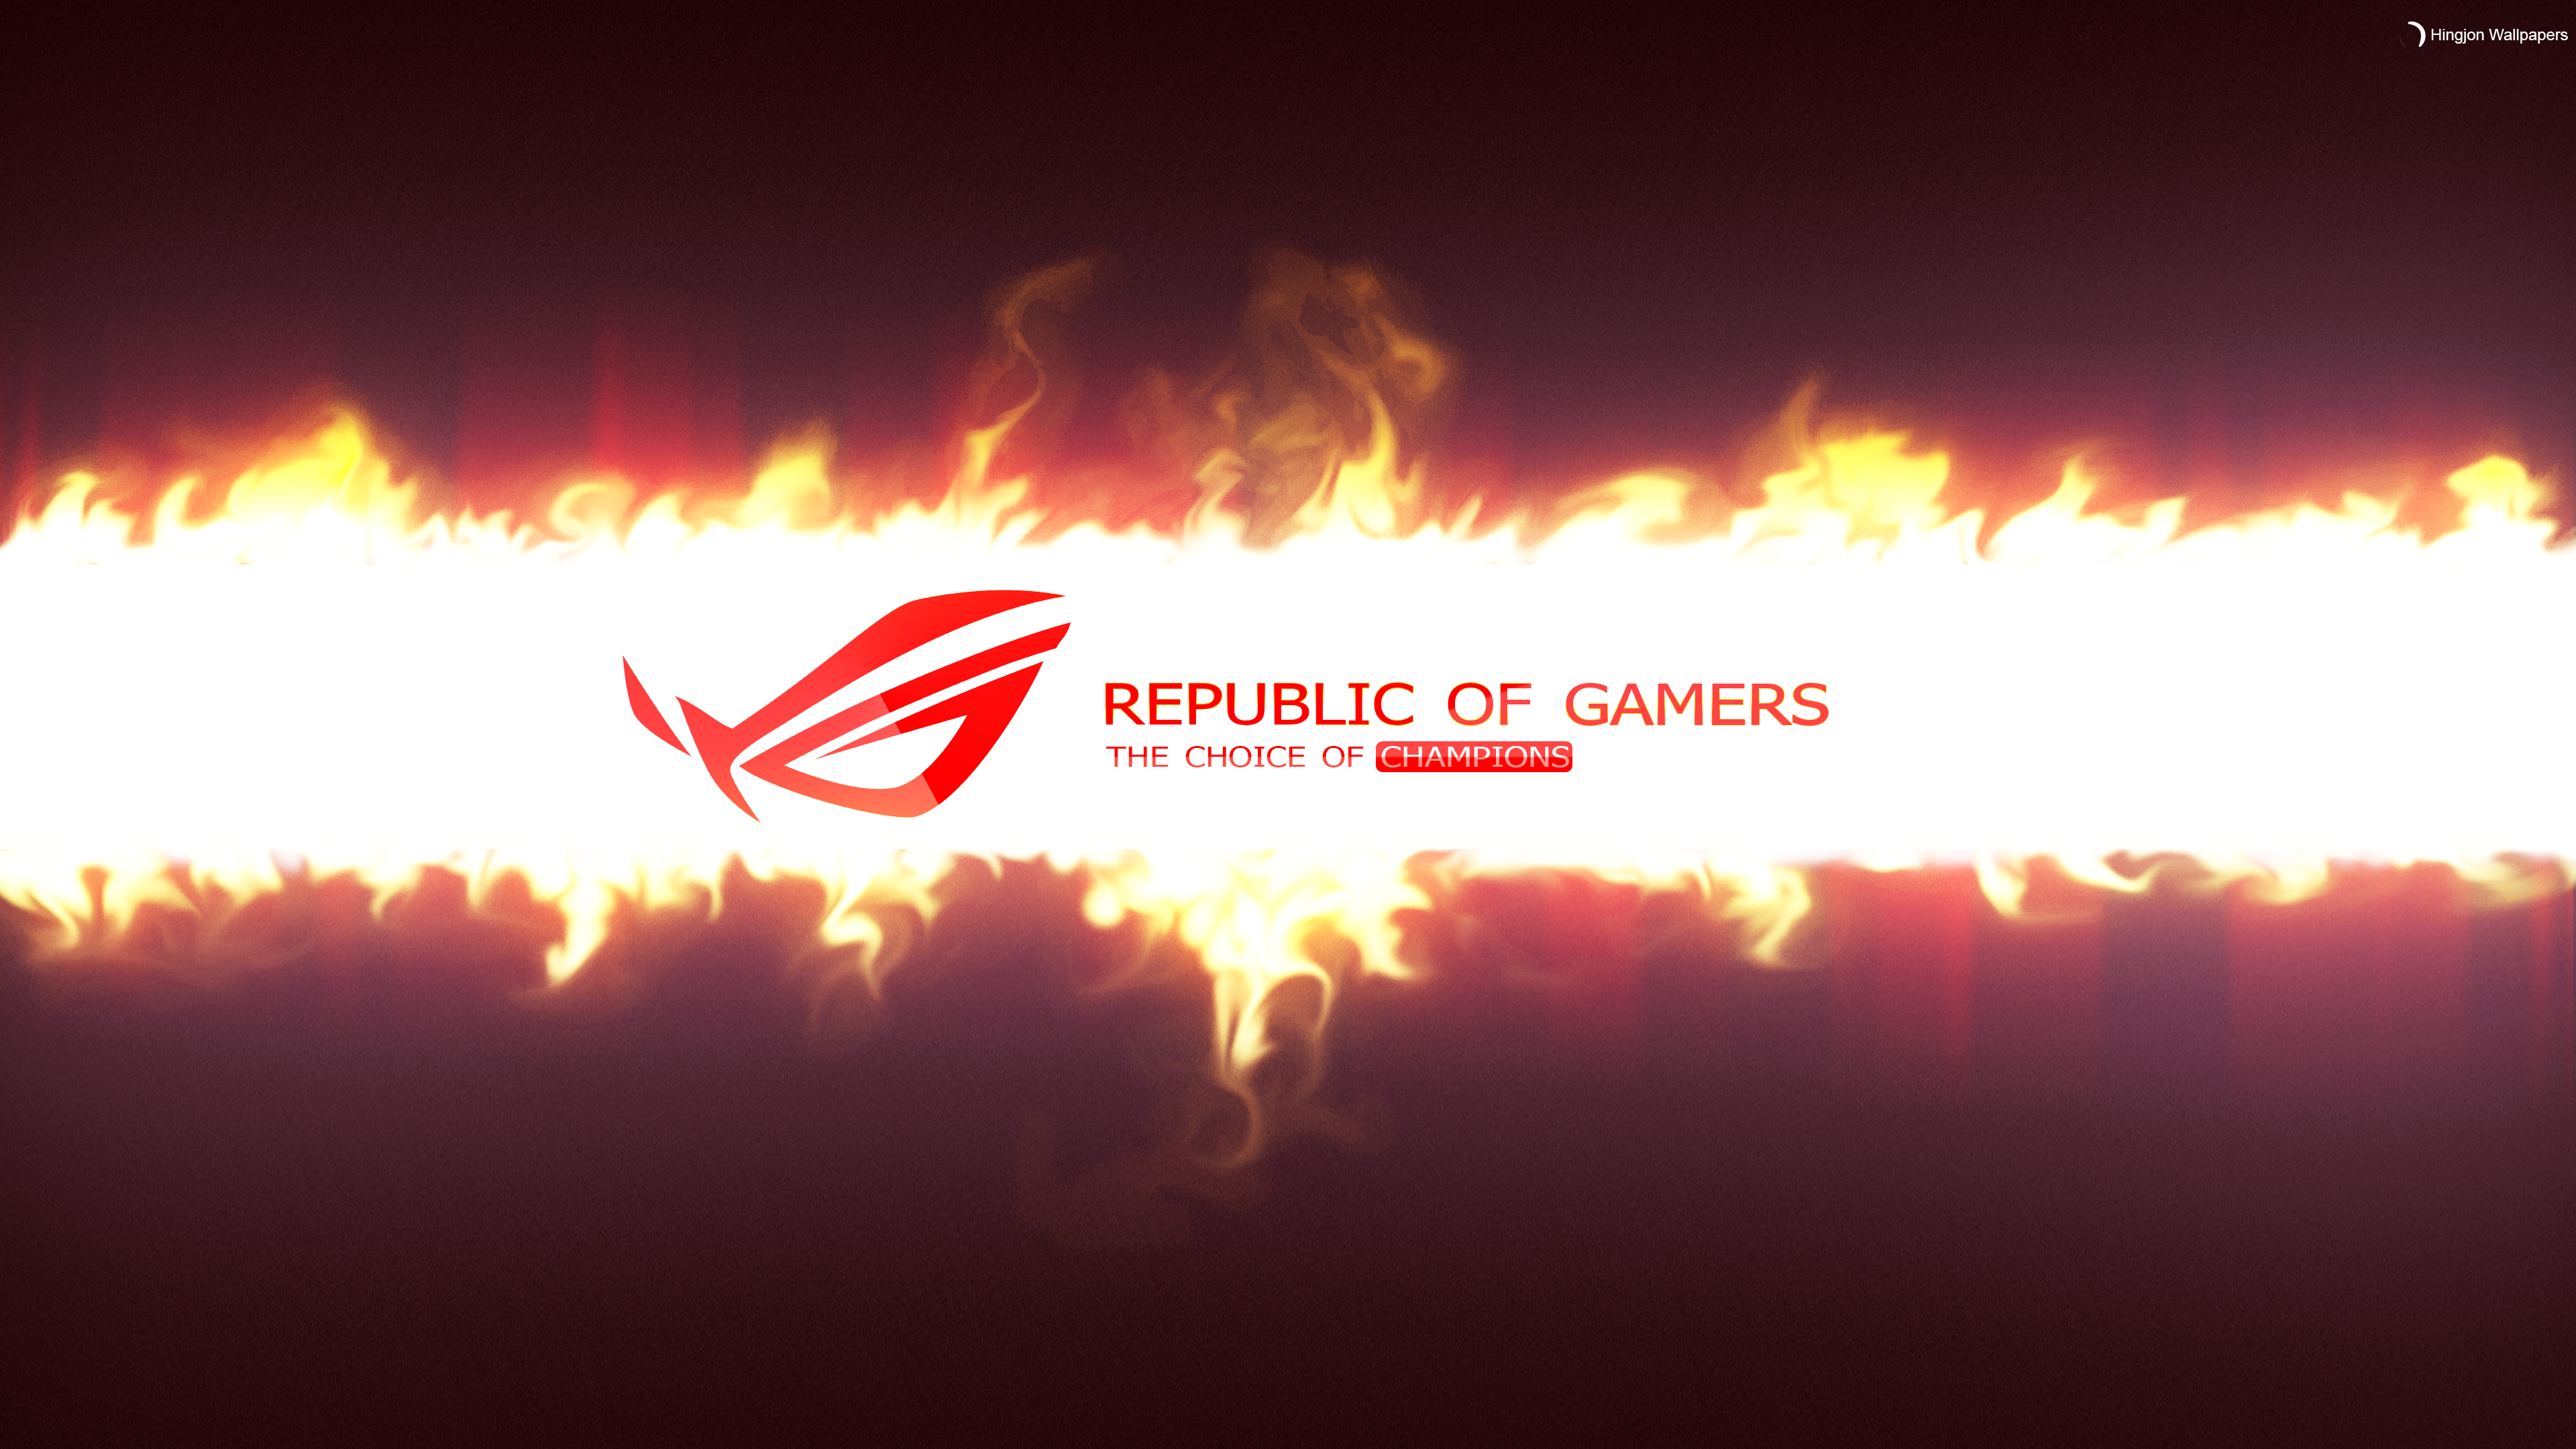 republic of gamers  contest 2014 4k  by hingjonwallpapers d7k3bfnpng 3840x2160